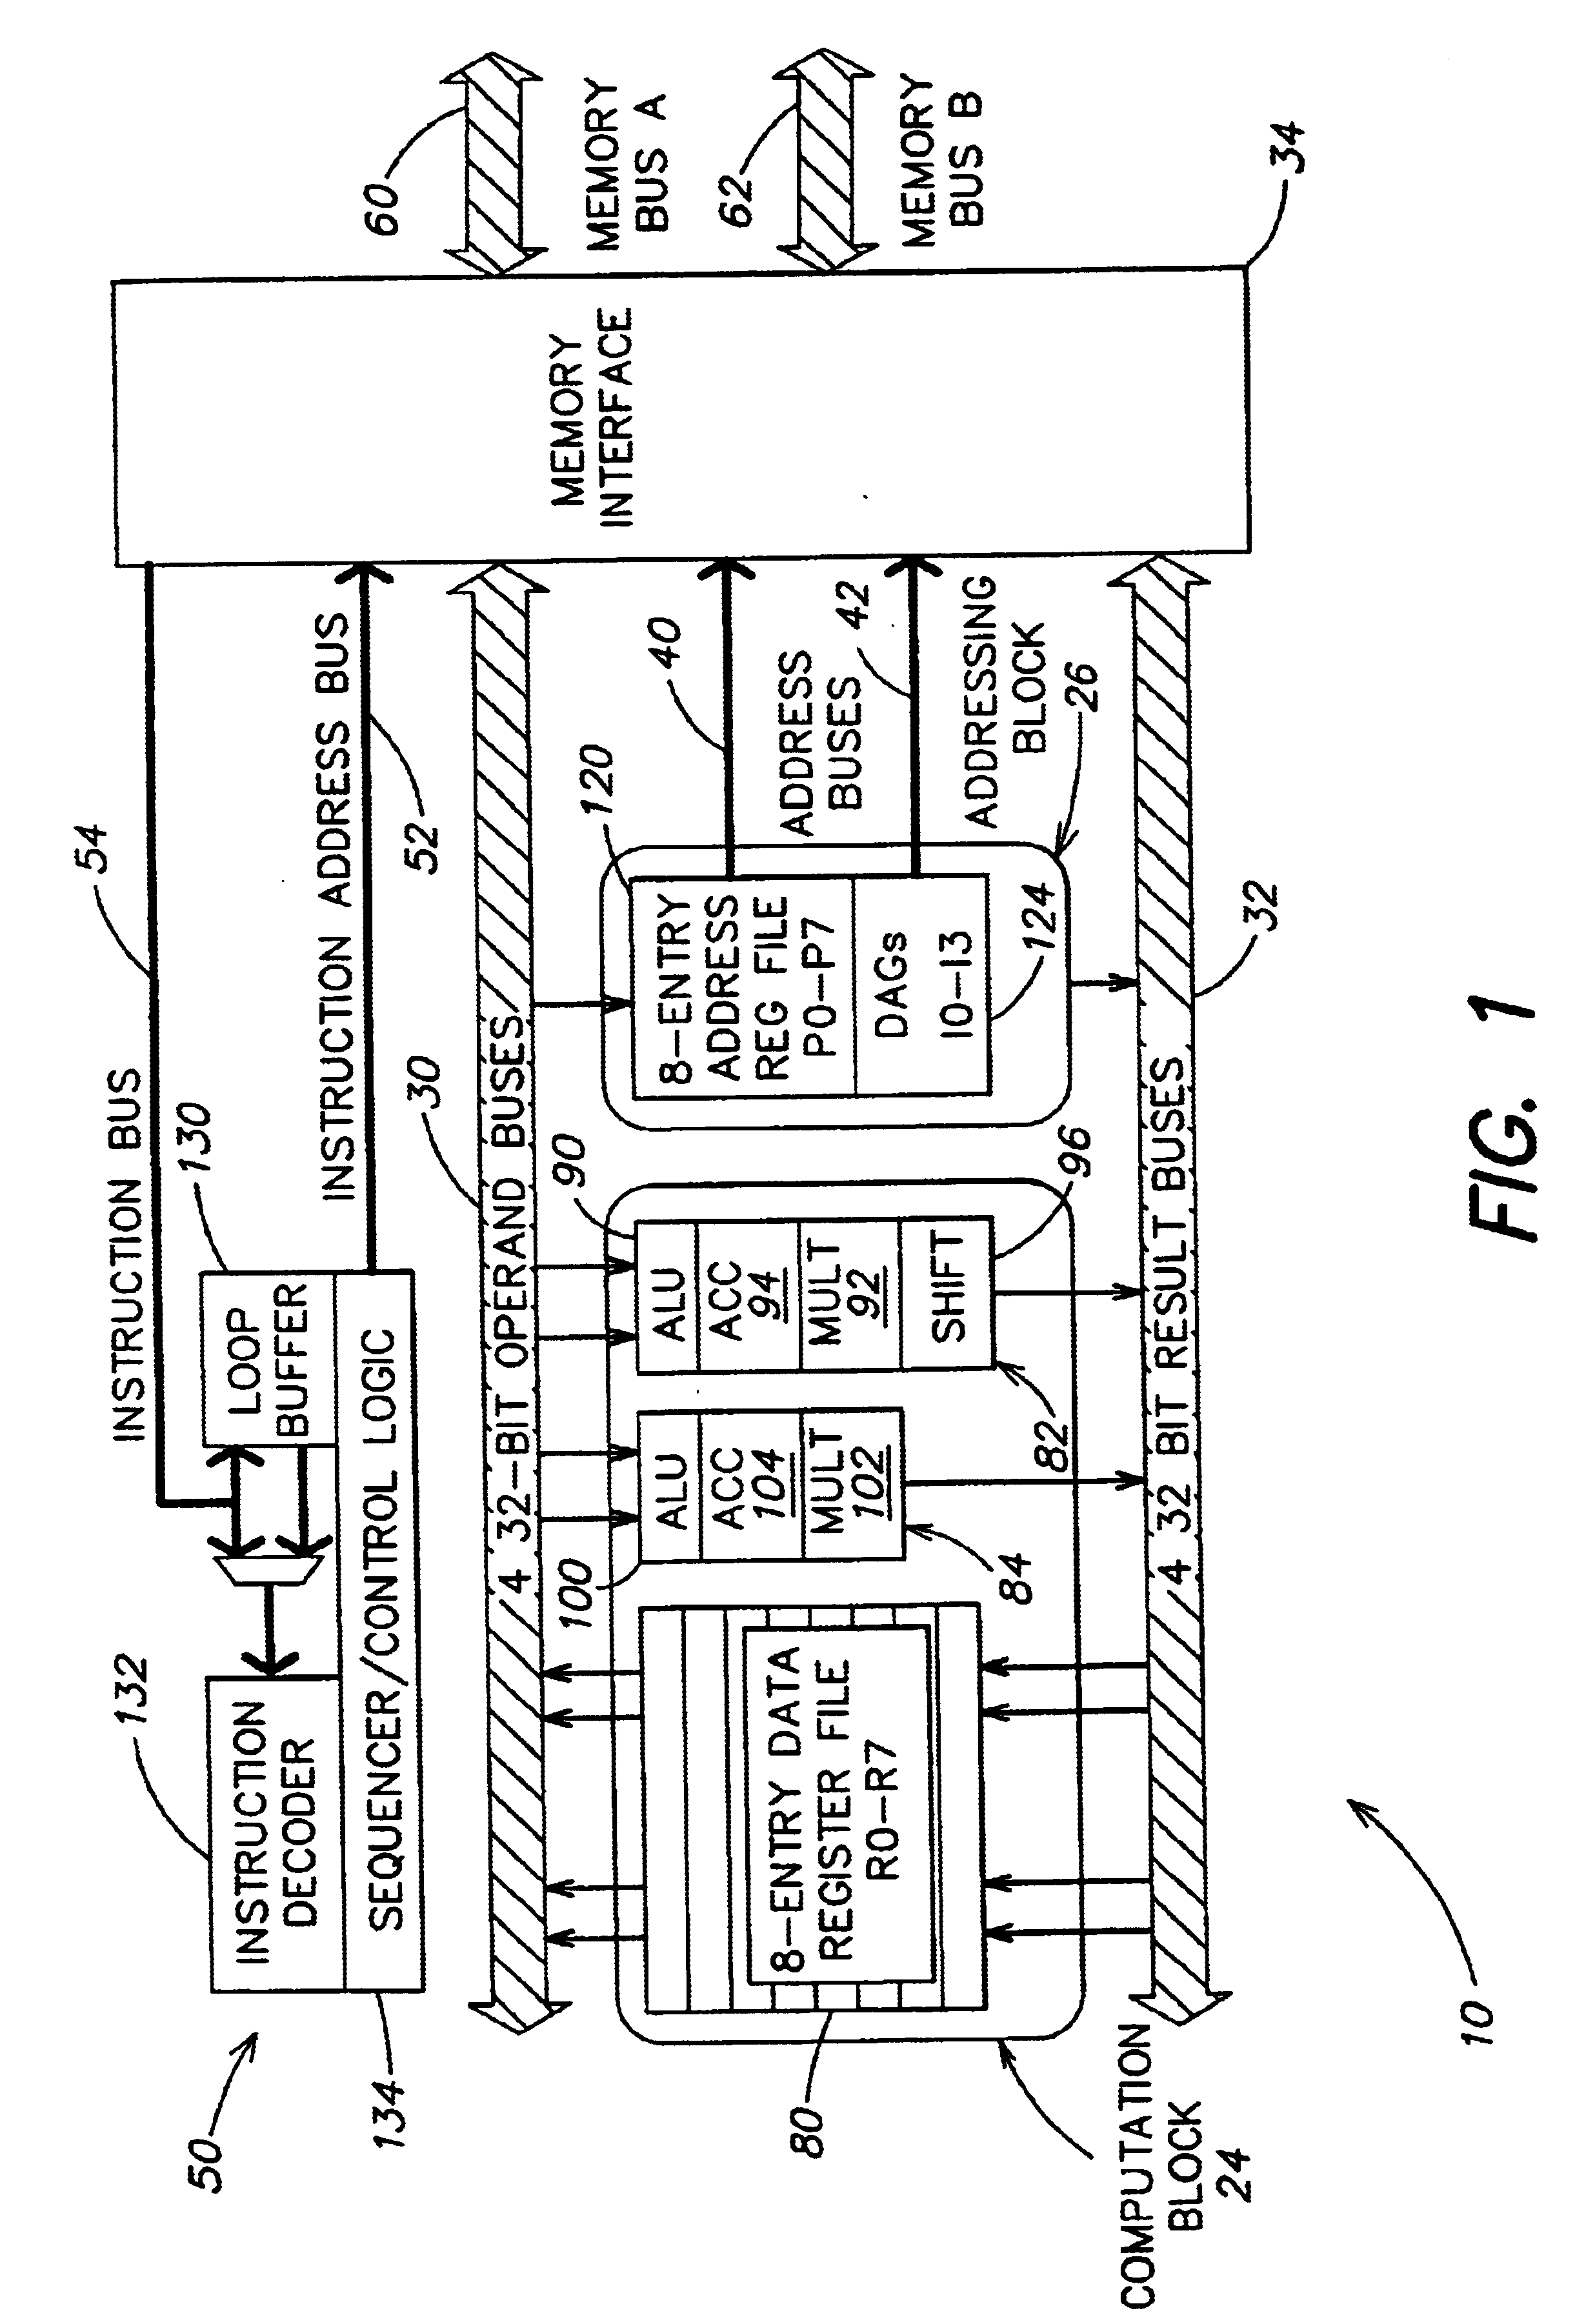 Digital signal processor computation core with pipeline having memory access stages and multiply accumulate stages positioned for efficient operation